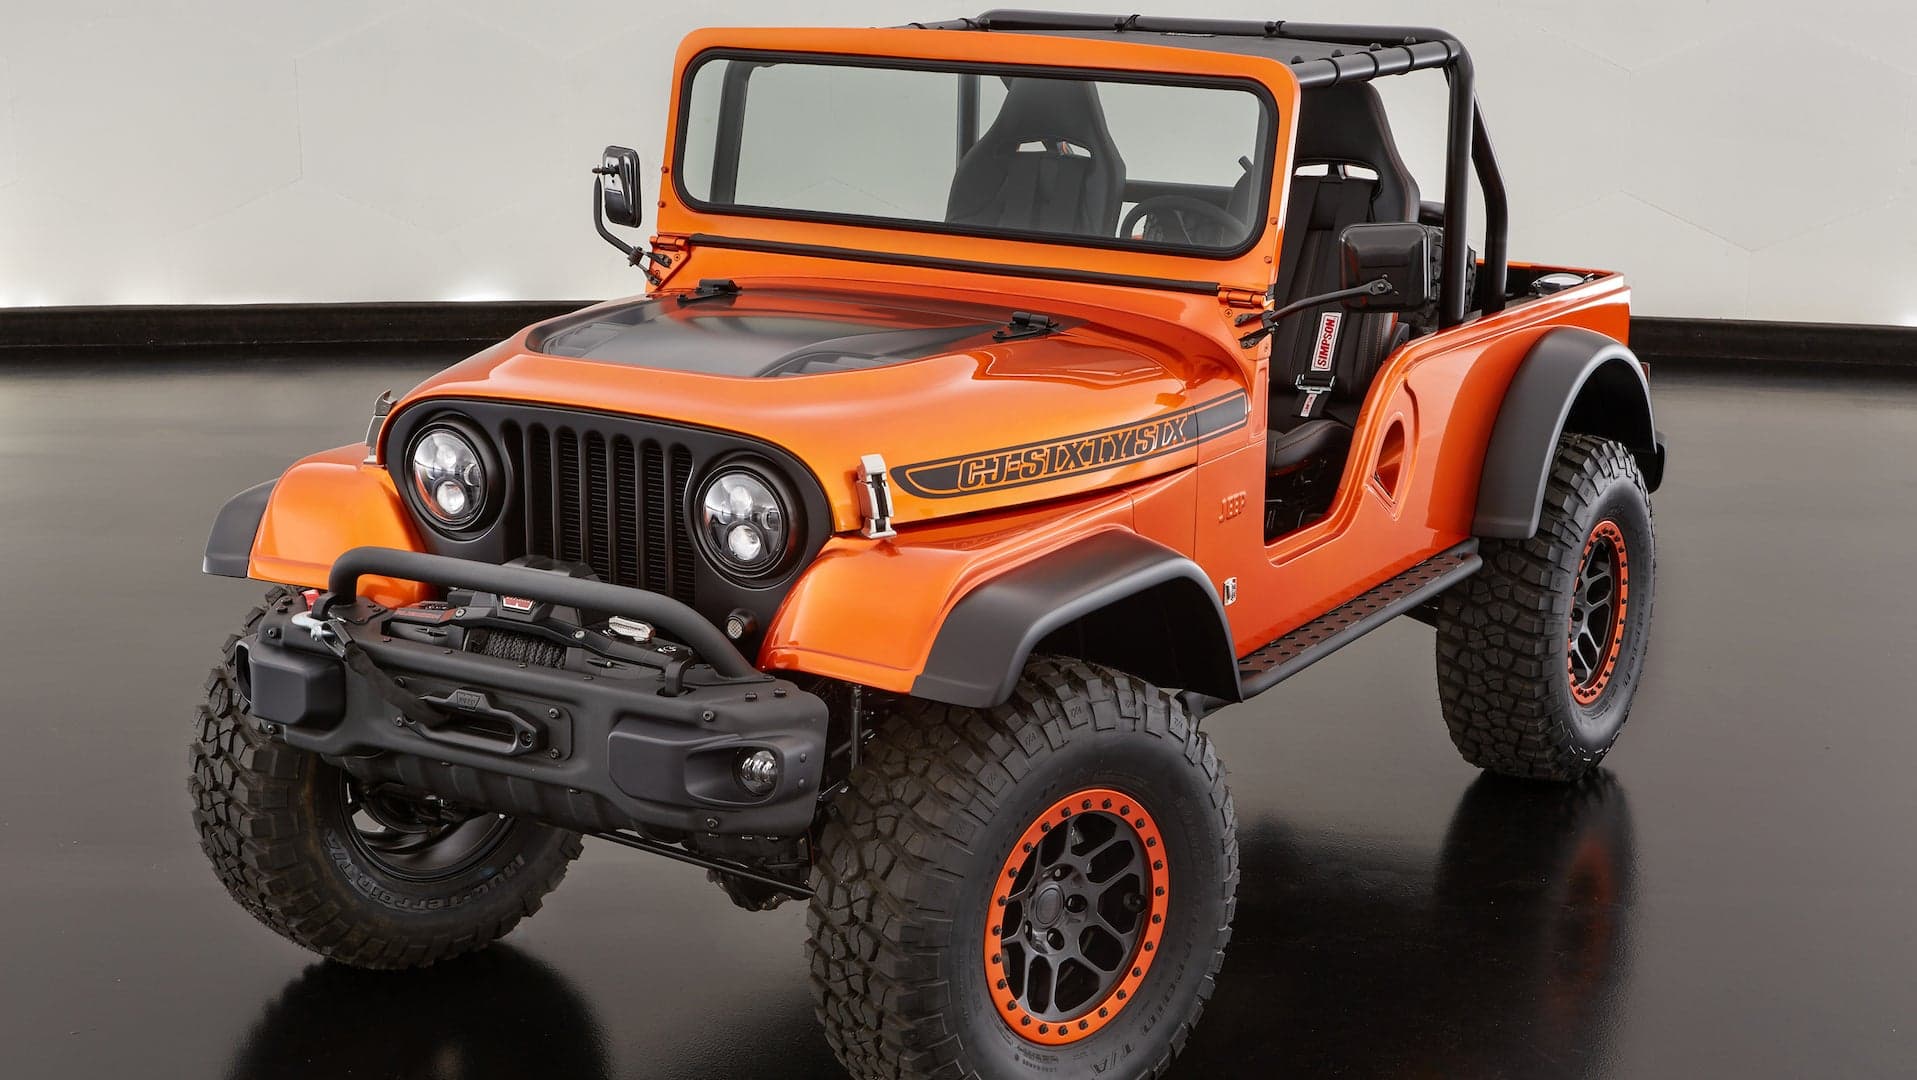 The Jeep Wrangler CJ66 SEMA Concept Is the Ultimate Throwback 4X4